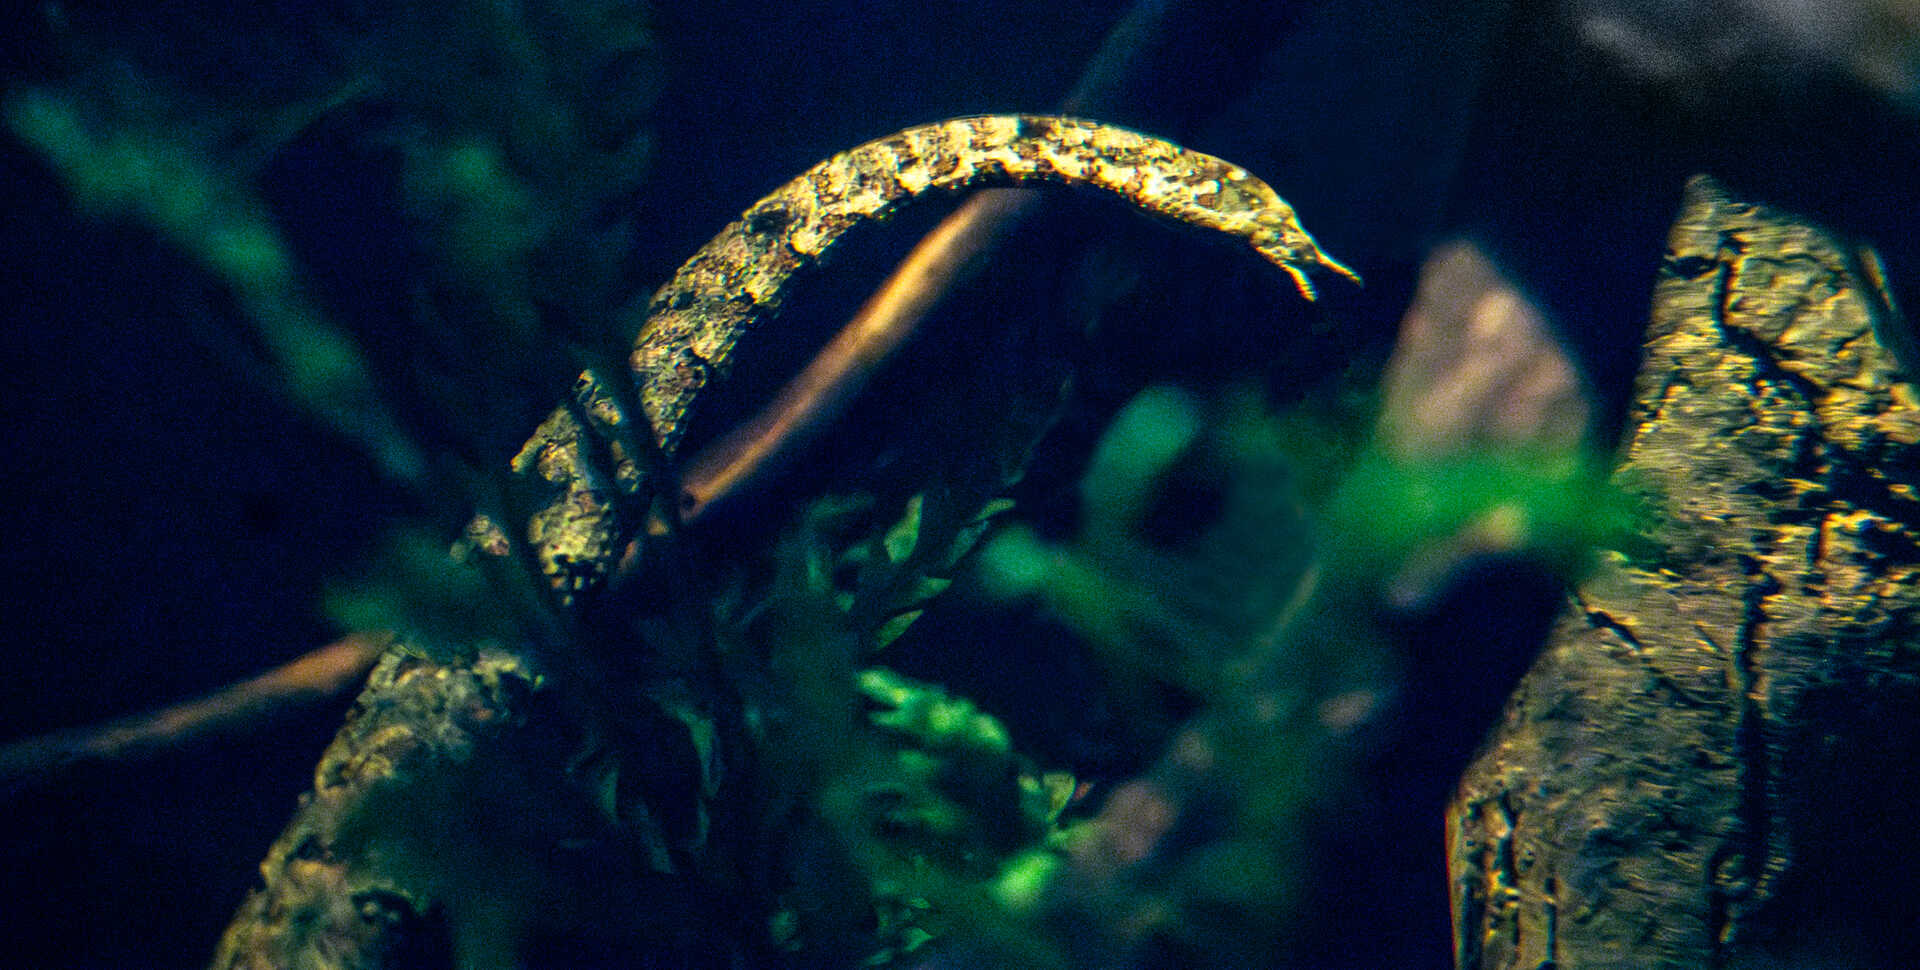 Tentacled snake on exhibit in Steinhart Aquarium at Cal Academy. Photo by Gayle Laird